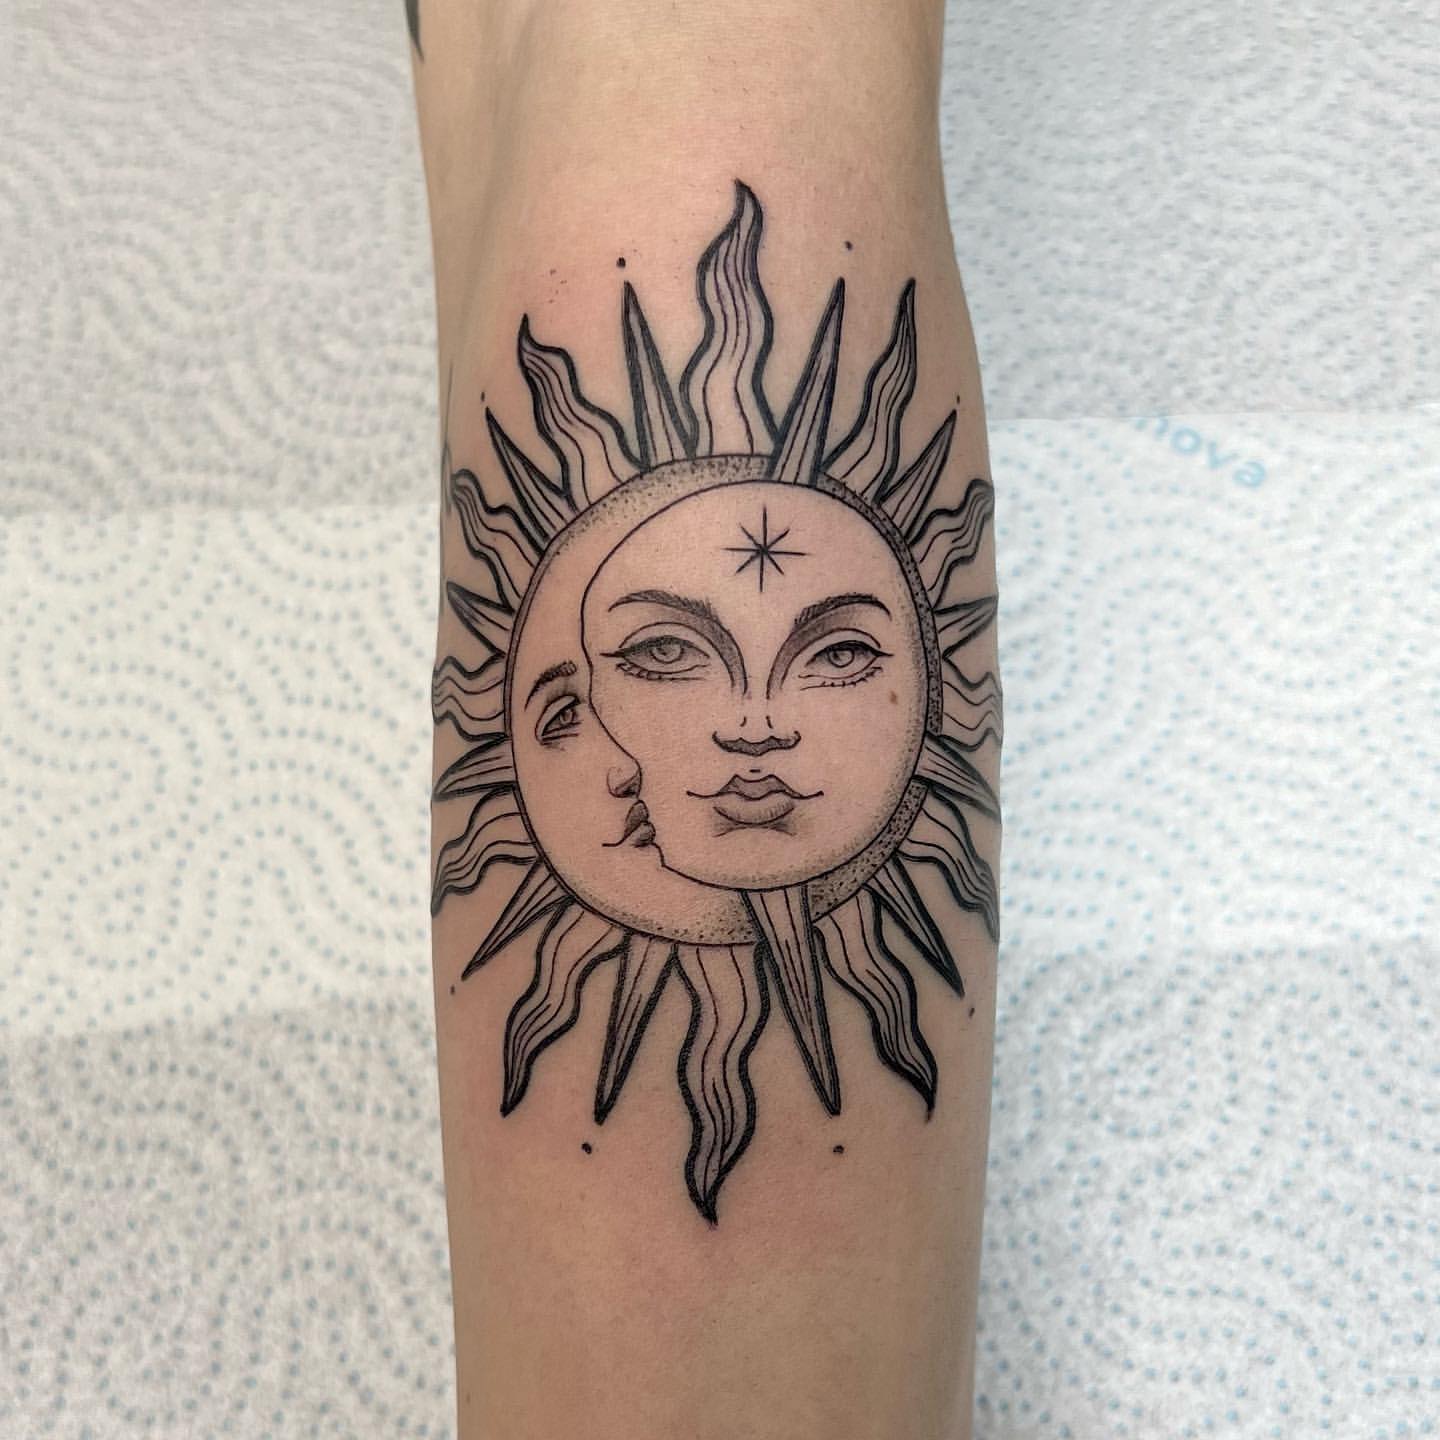 Awesome SunMoon Combination Tattoo Design and Tattoo by Aaryan Tattooist  Tattoo Style Lines  Dots Best C  Moon tattoo designs Sun tattoos  Tattoos for women